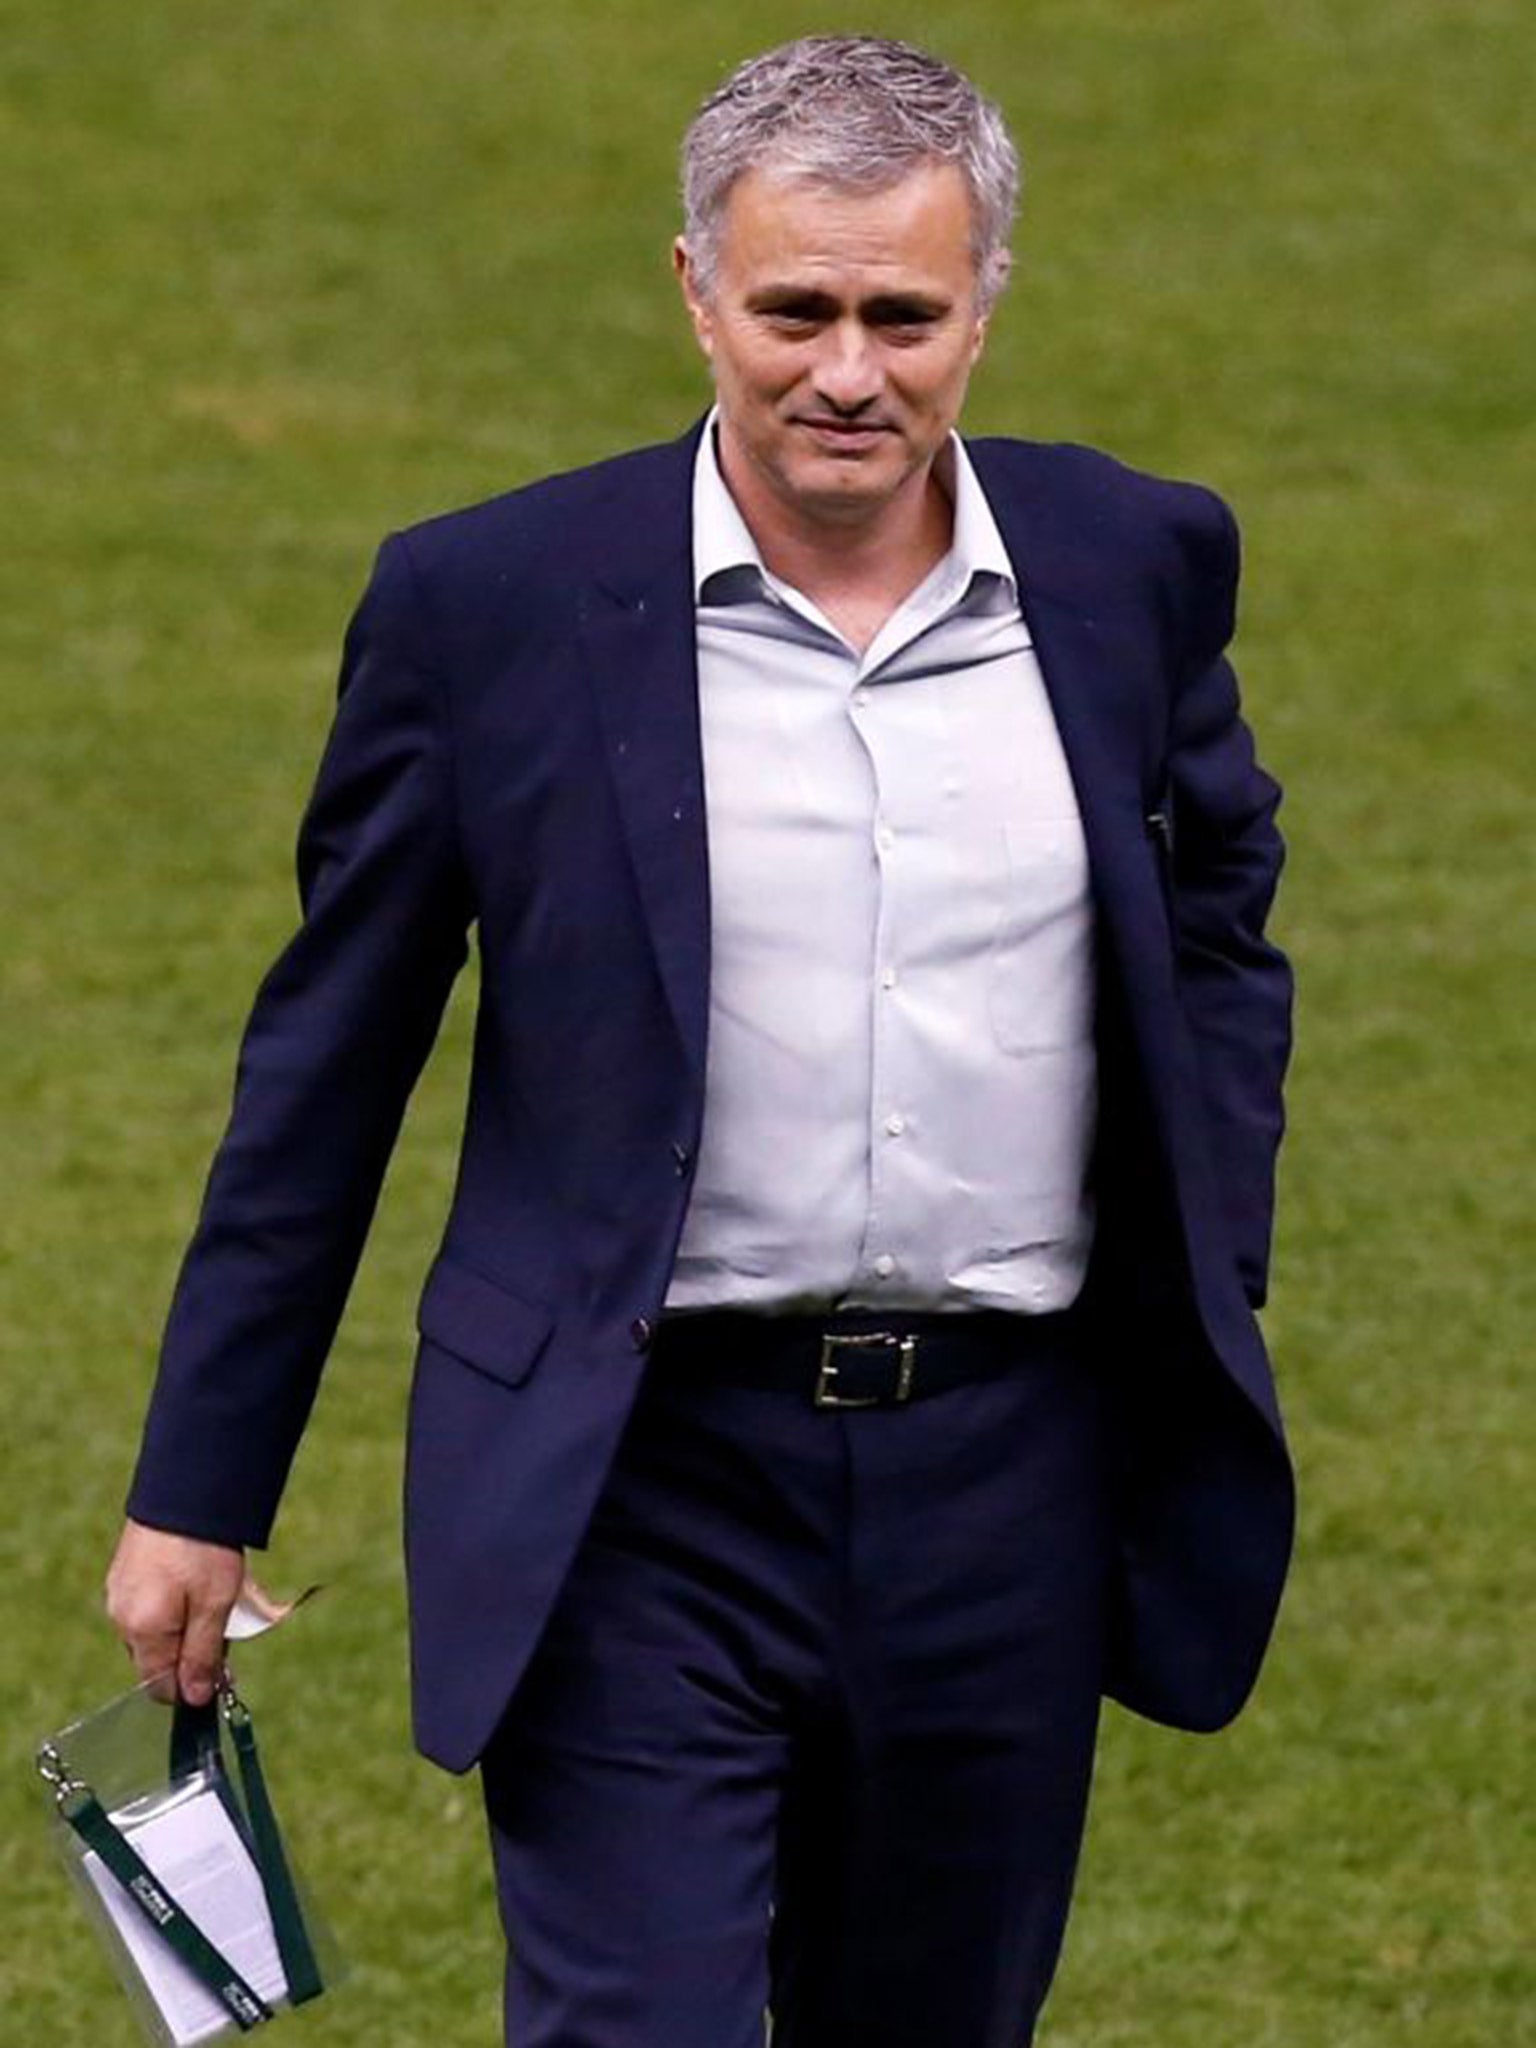 Mourinho says 'there is plenty of time' to become Manchester United manager